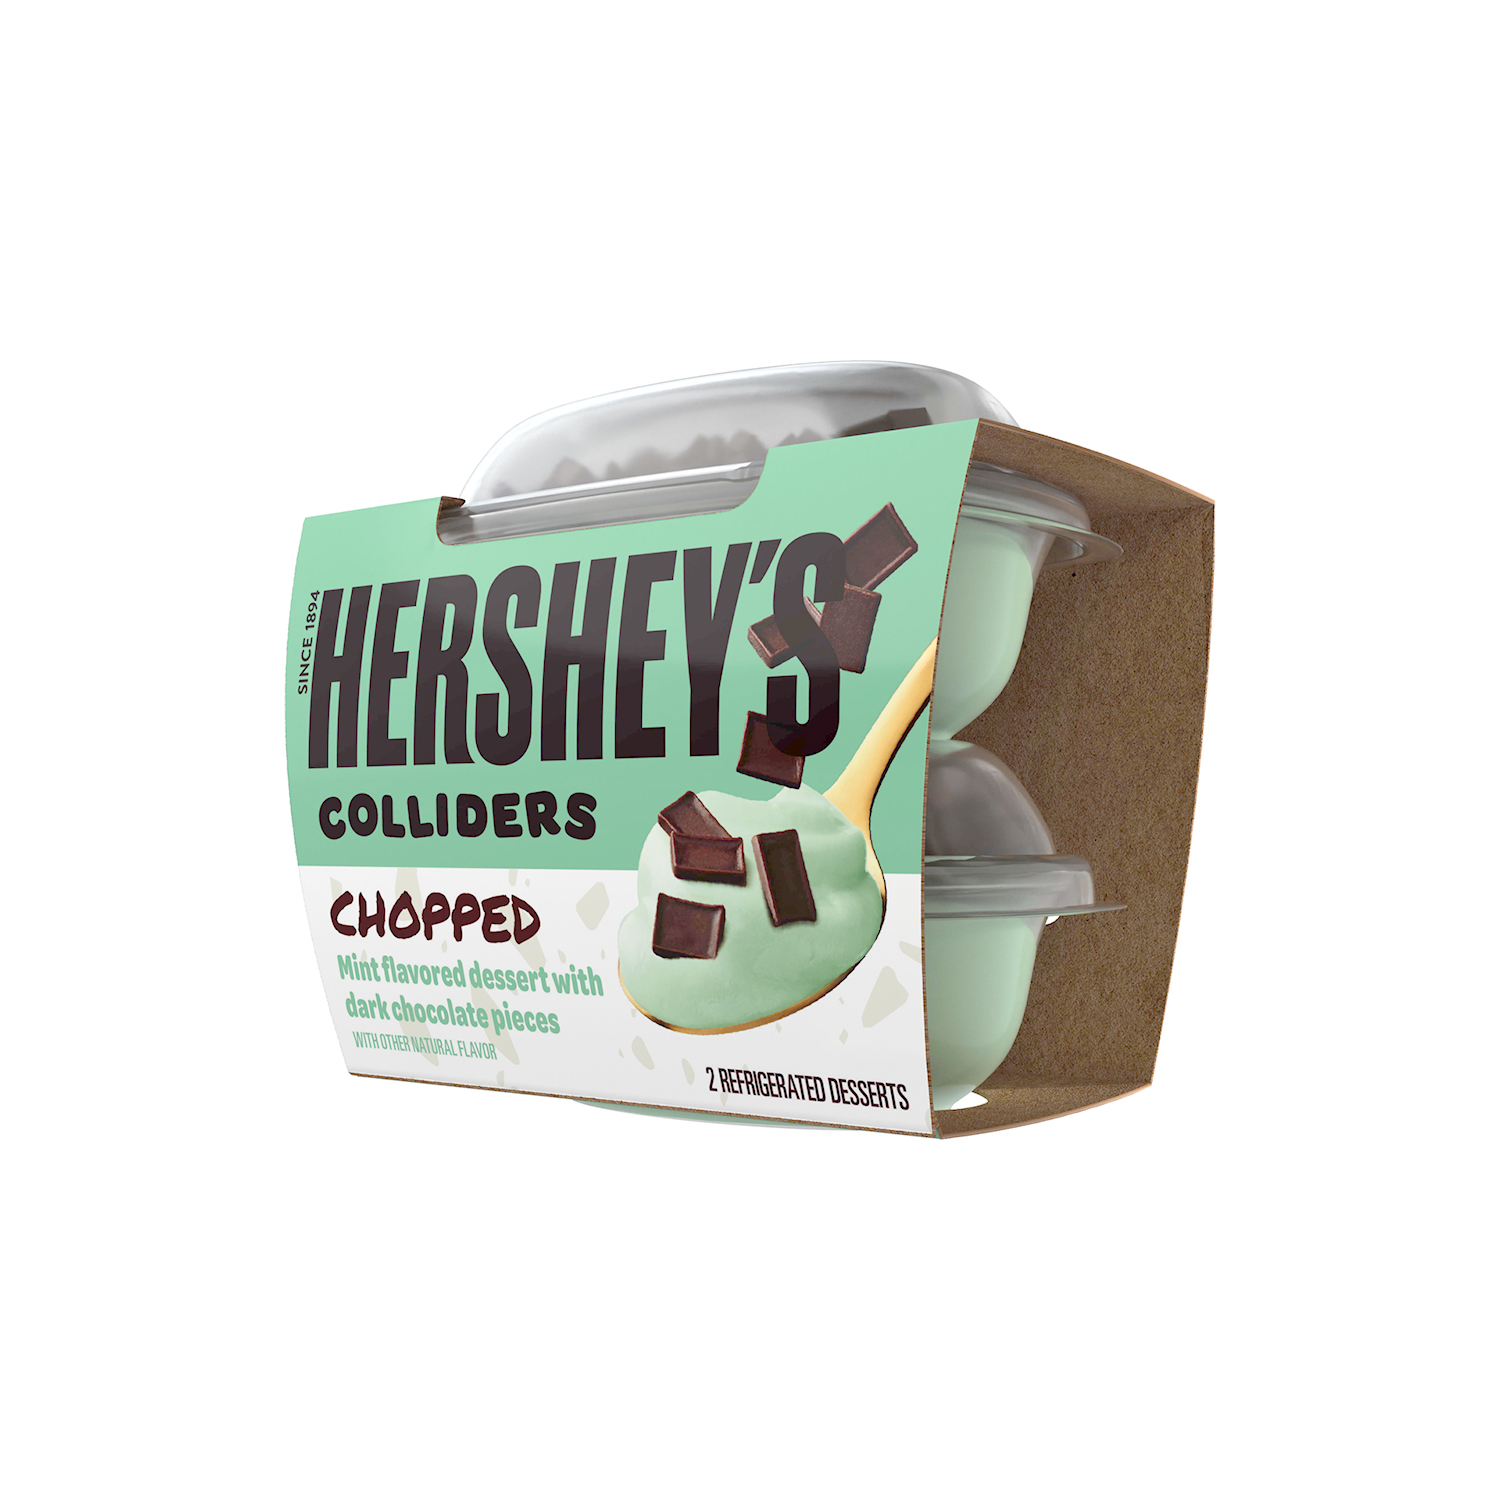 HERSHEY'S COLLIDERS™ Chopped Mint Dessert, 7 oz, 2 pack - Right of Package